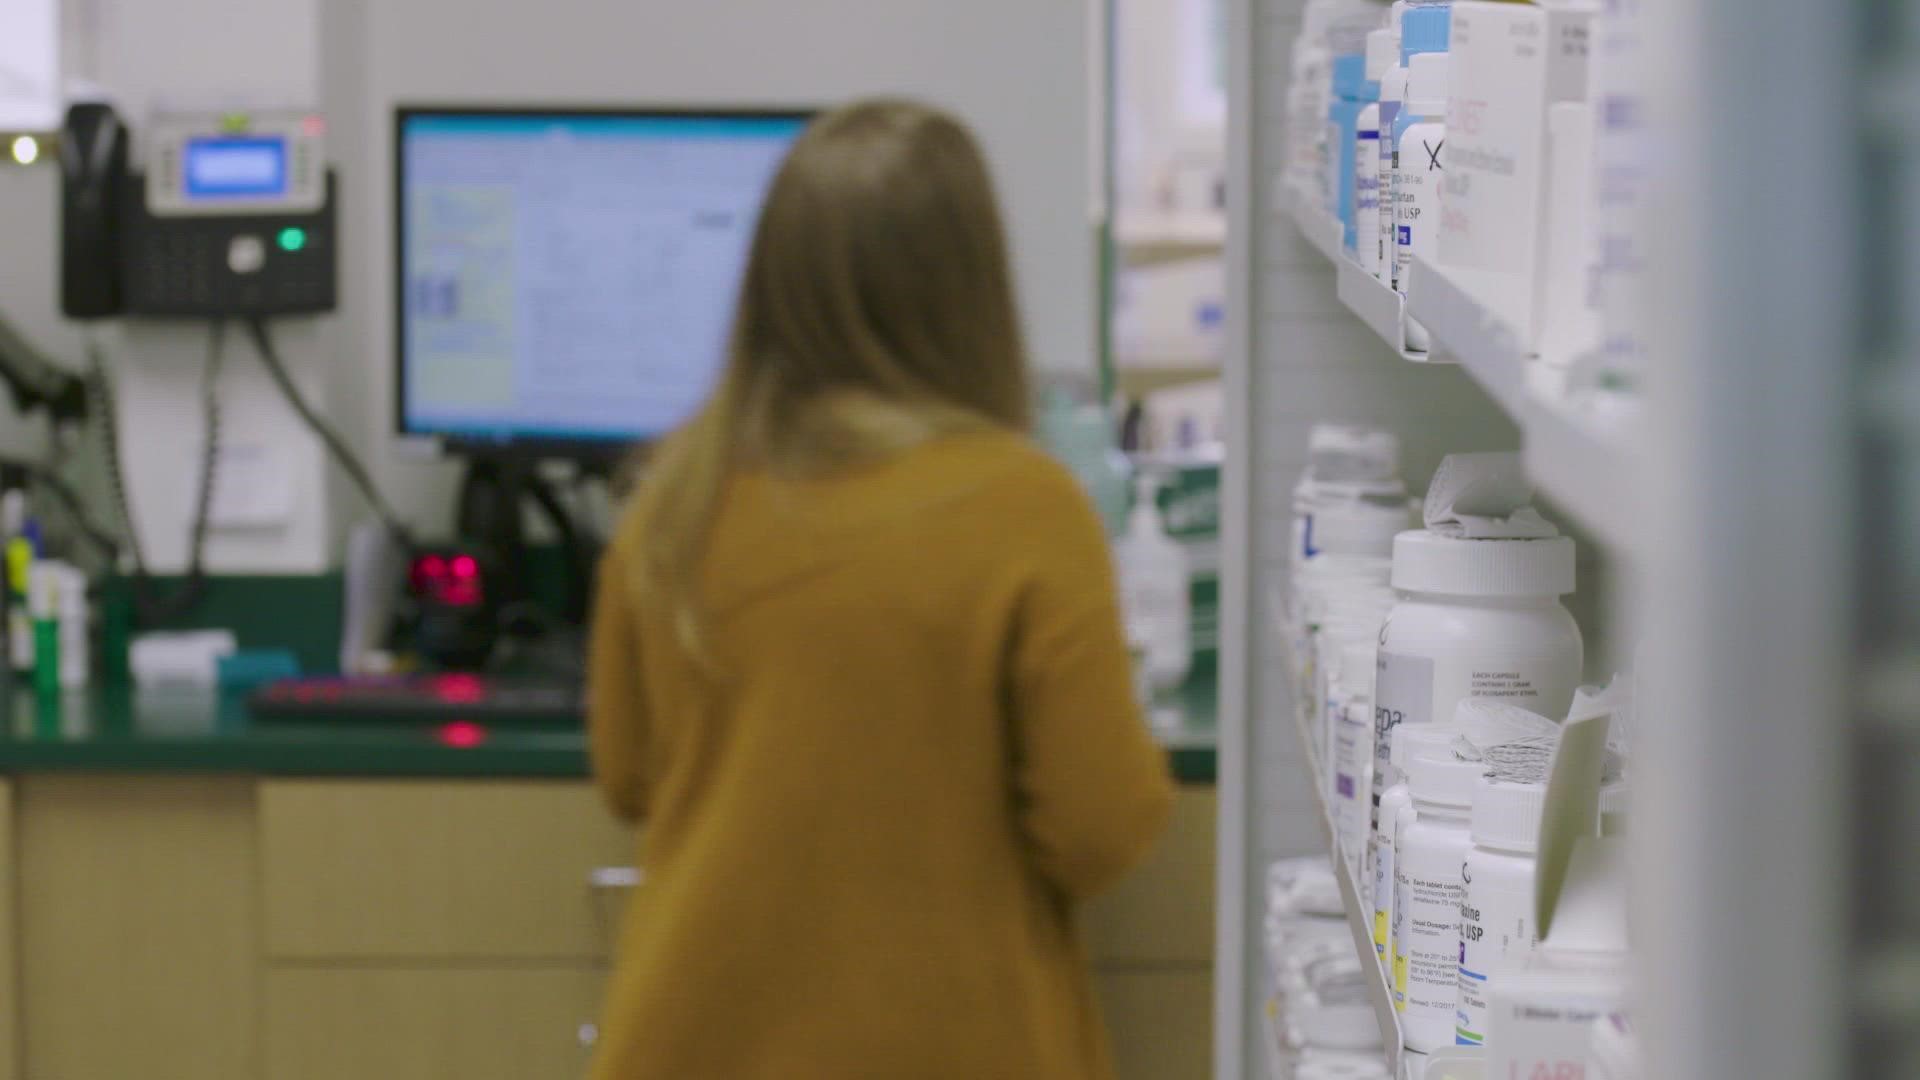 A growing number of Washingtonians are being incentivized to ditch local community pharmacies and instead get their prescriptions sent directly to their homes.